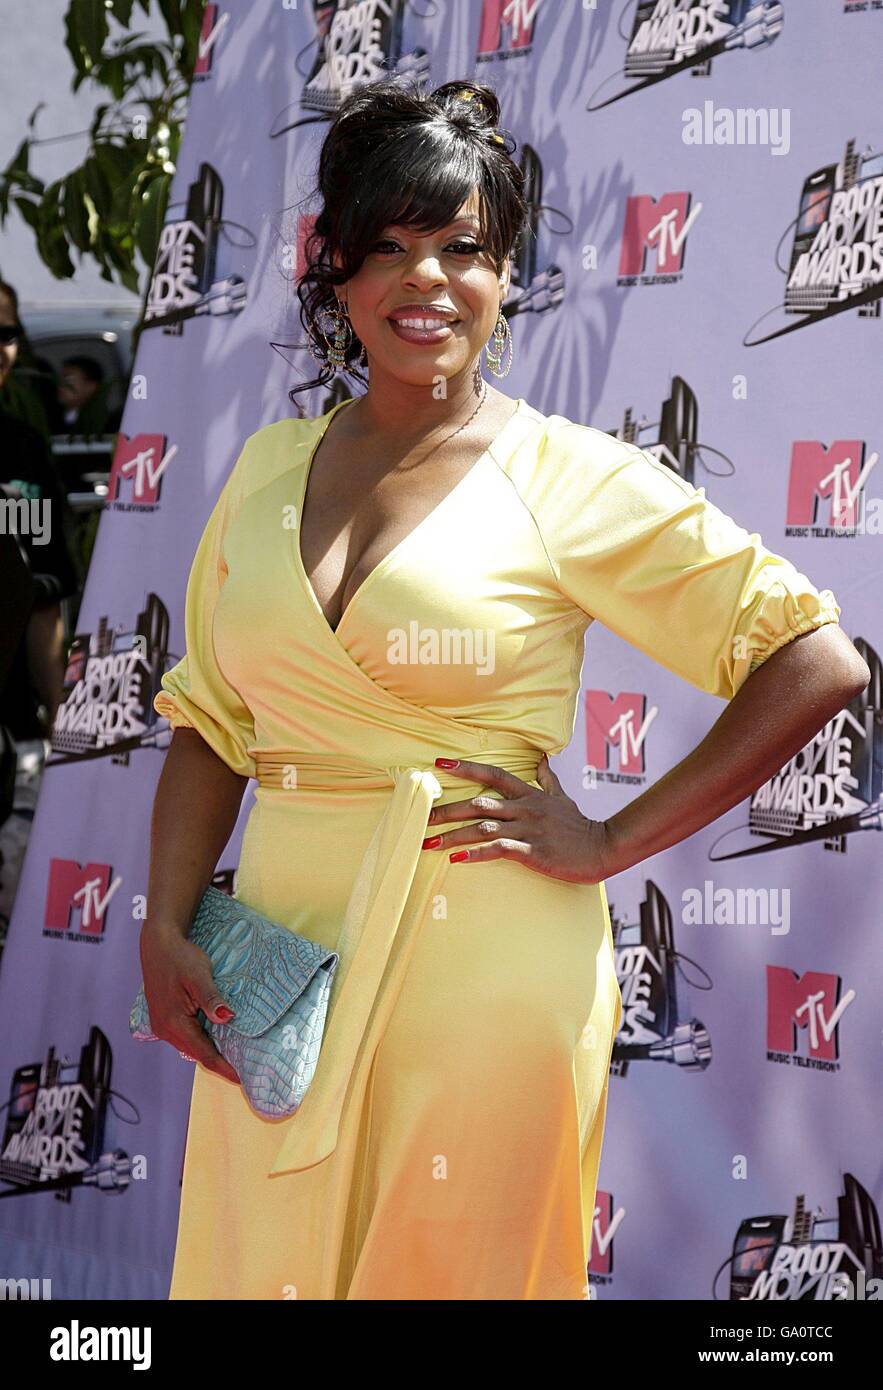 MTV Movie Awards 2007. Niecy Nash arrives for the 2007 MTV Movie awards at the Gibson Amphitheatre, Universal City, Los Angeles. Stock Photo